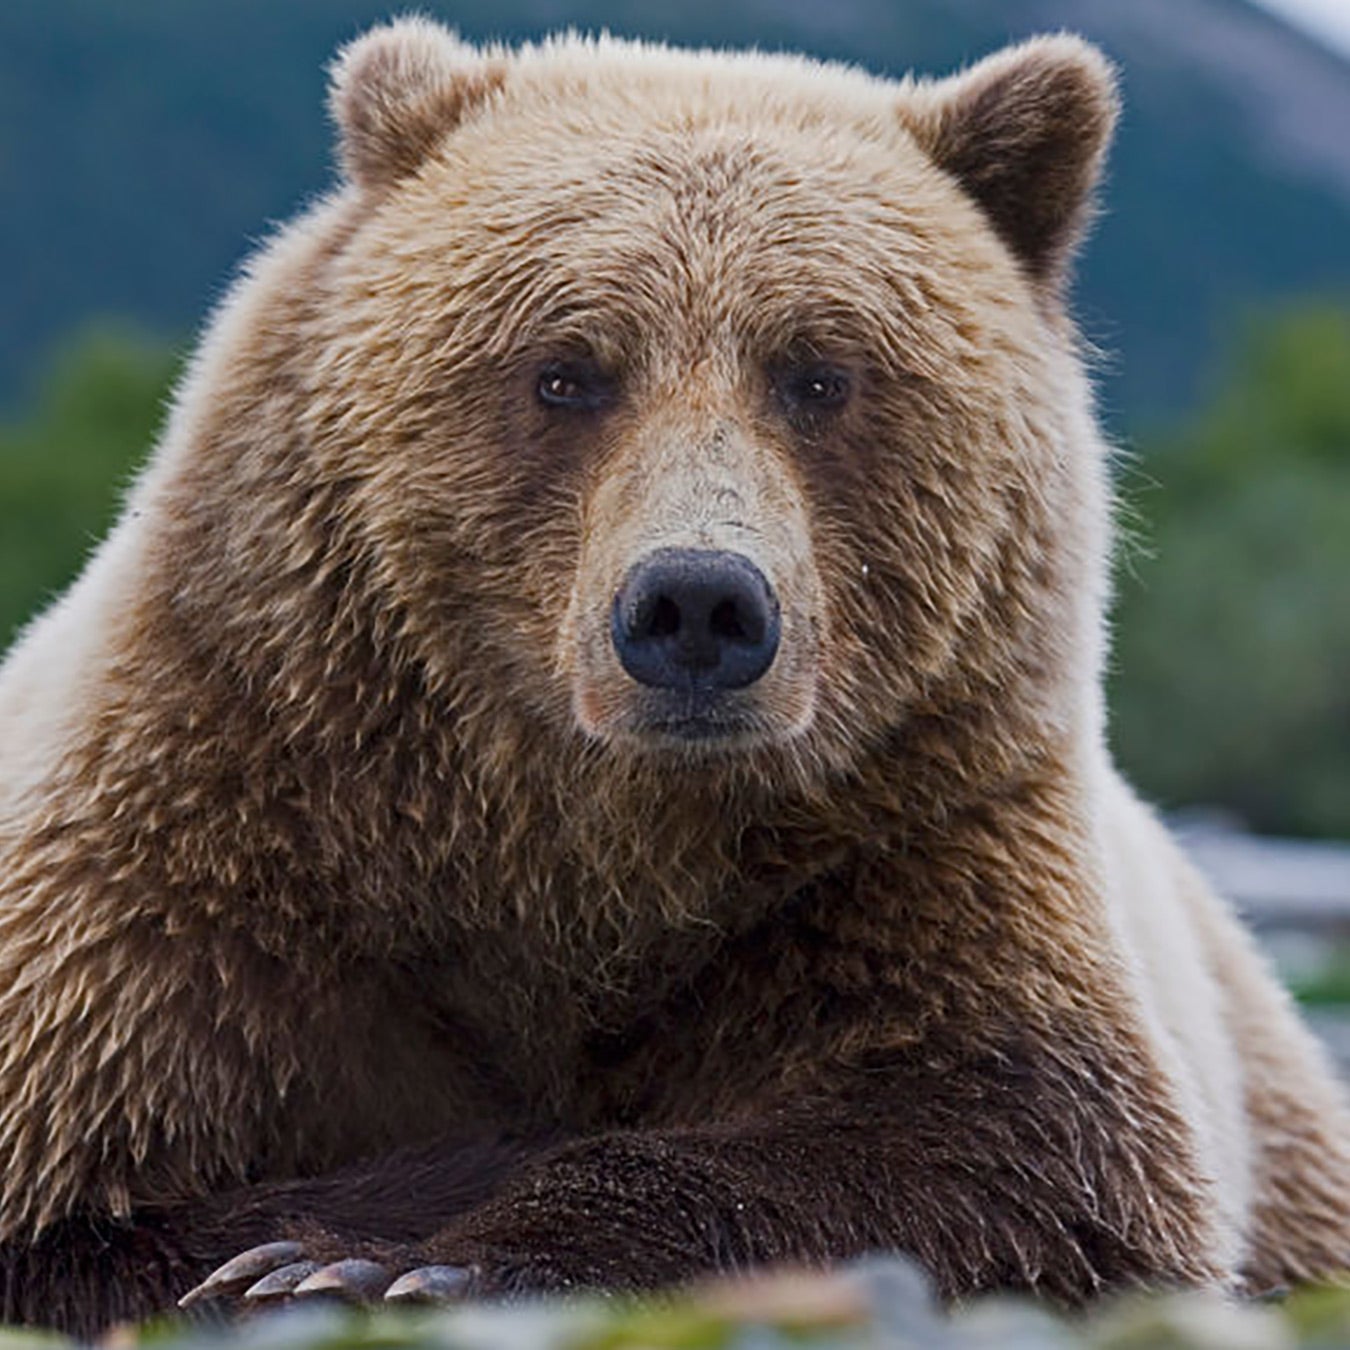 Two People Were Attacked and Killed by a Grizzly Bear in Canada